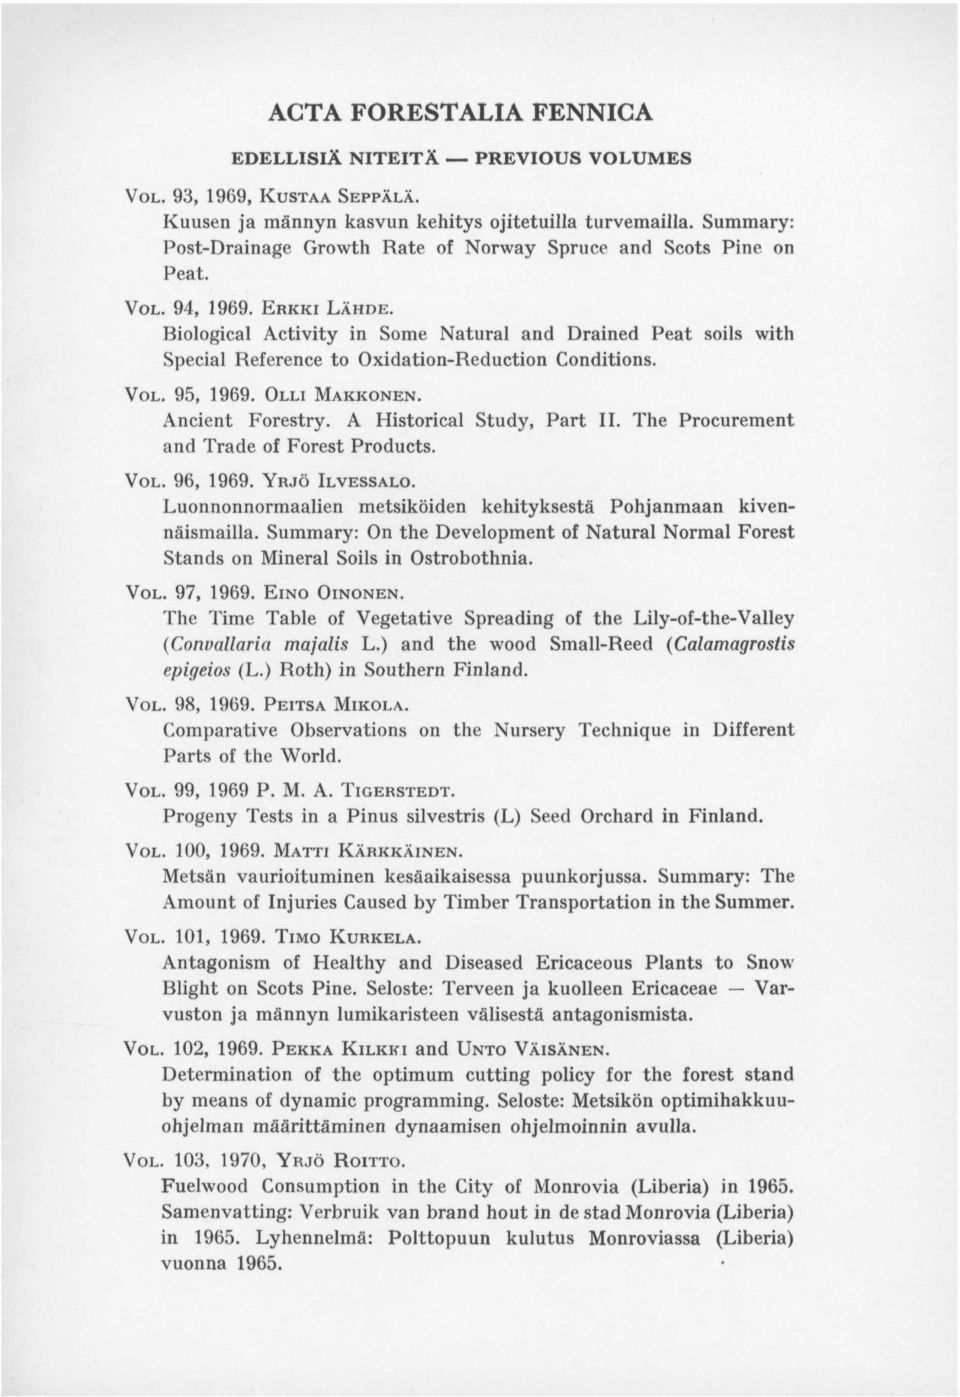 Biological Activity in Some Natural and Drained Peat soils with Special Reference to Oxidation-Reduction Conditions. VOL. 95, 1969. OLLI MAKKONEN. Ancient Forestry. A Historical Study, Part II.